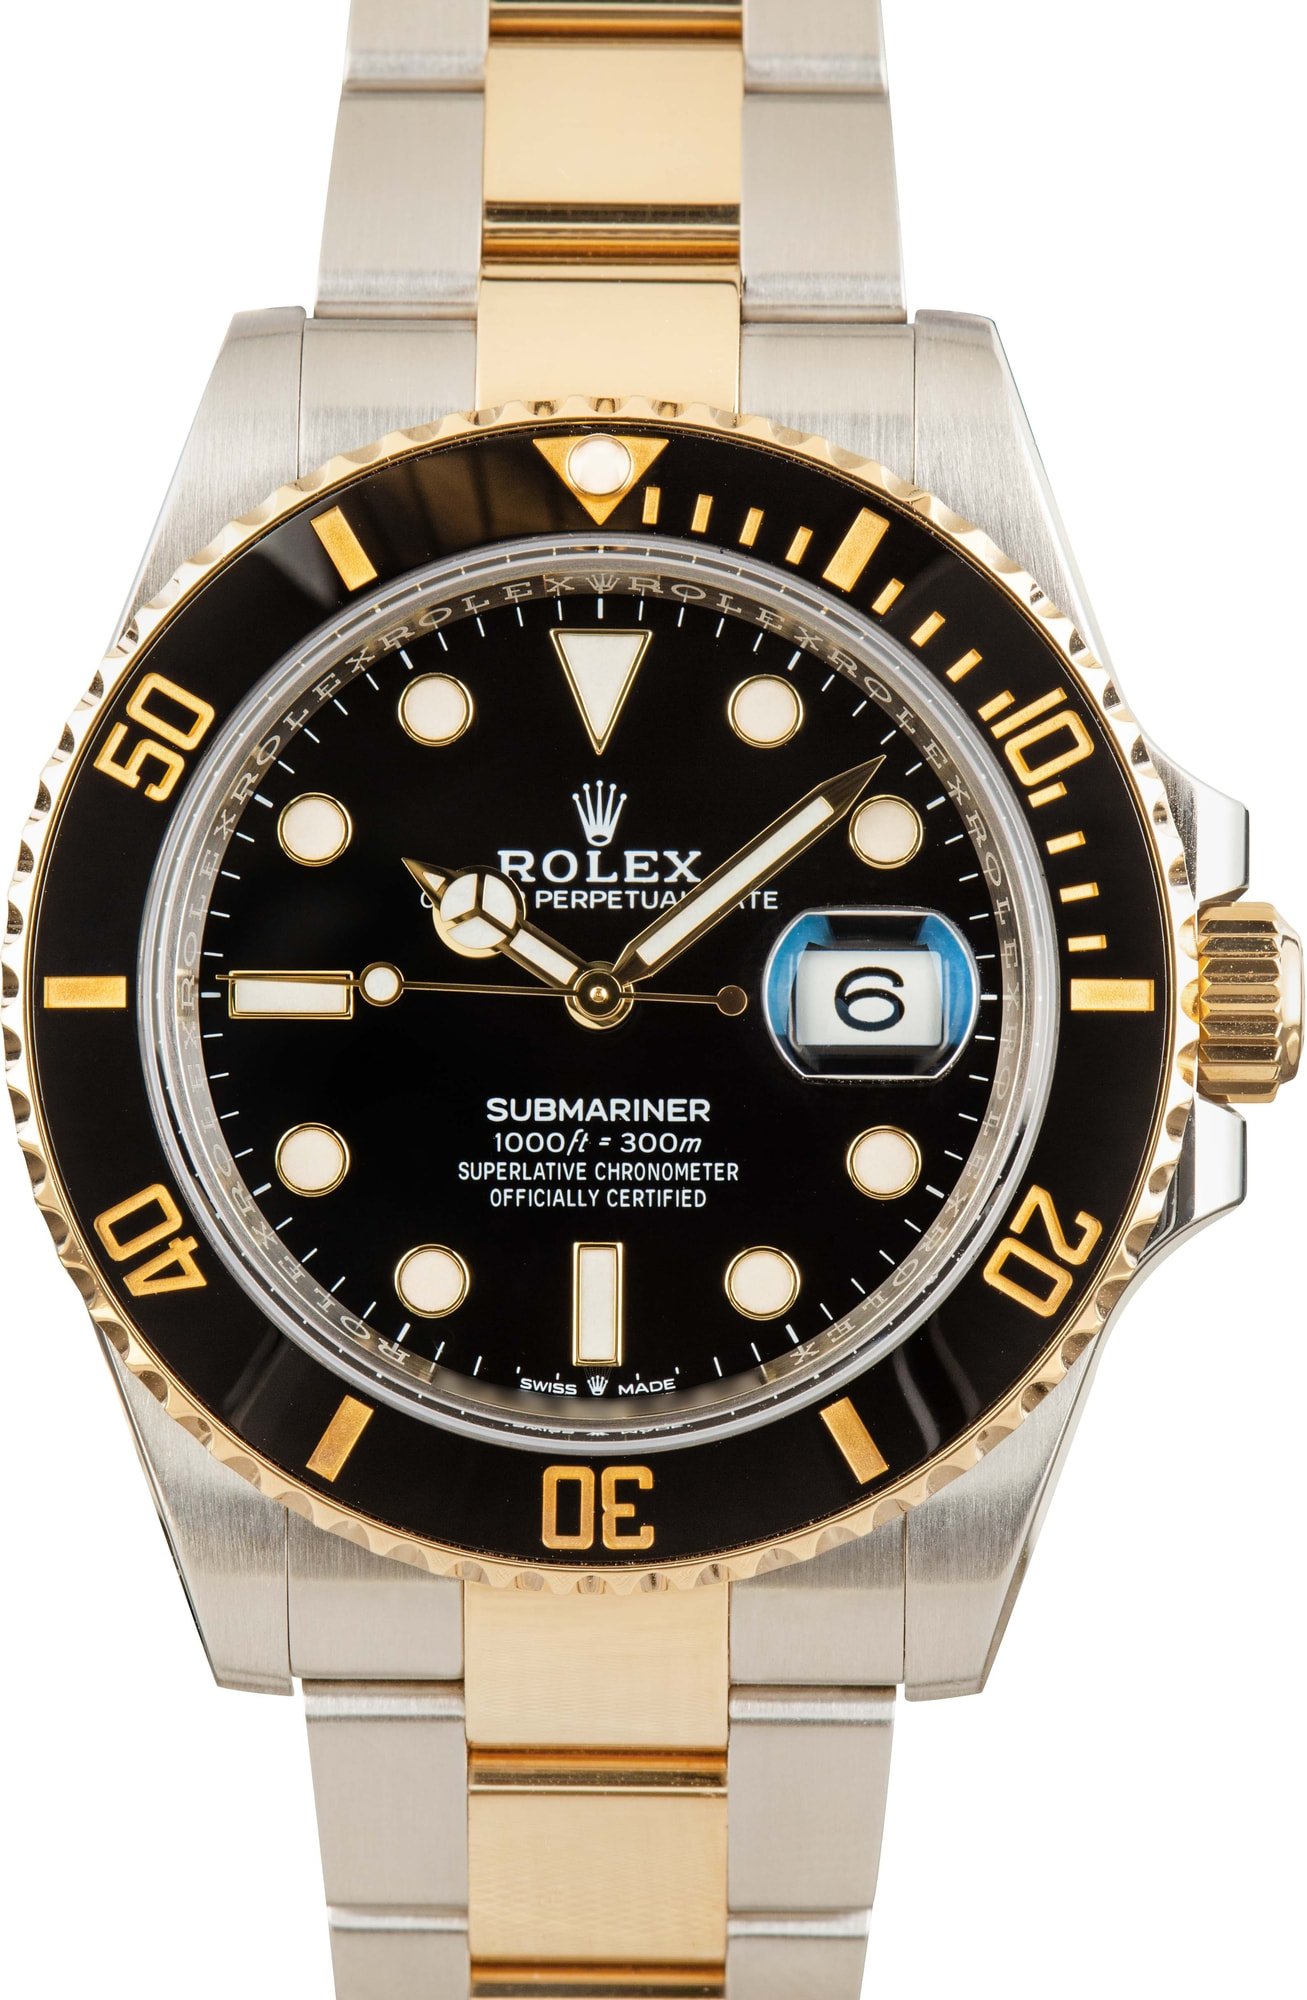 Rolex Submariner Two Tone - BobsWatches.com